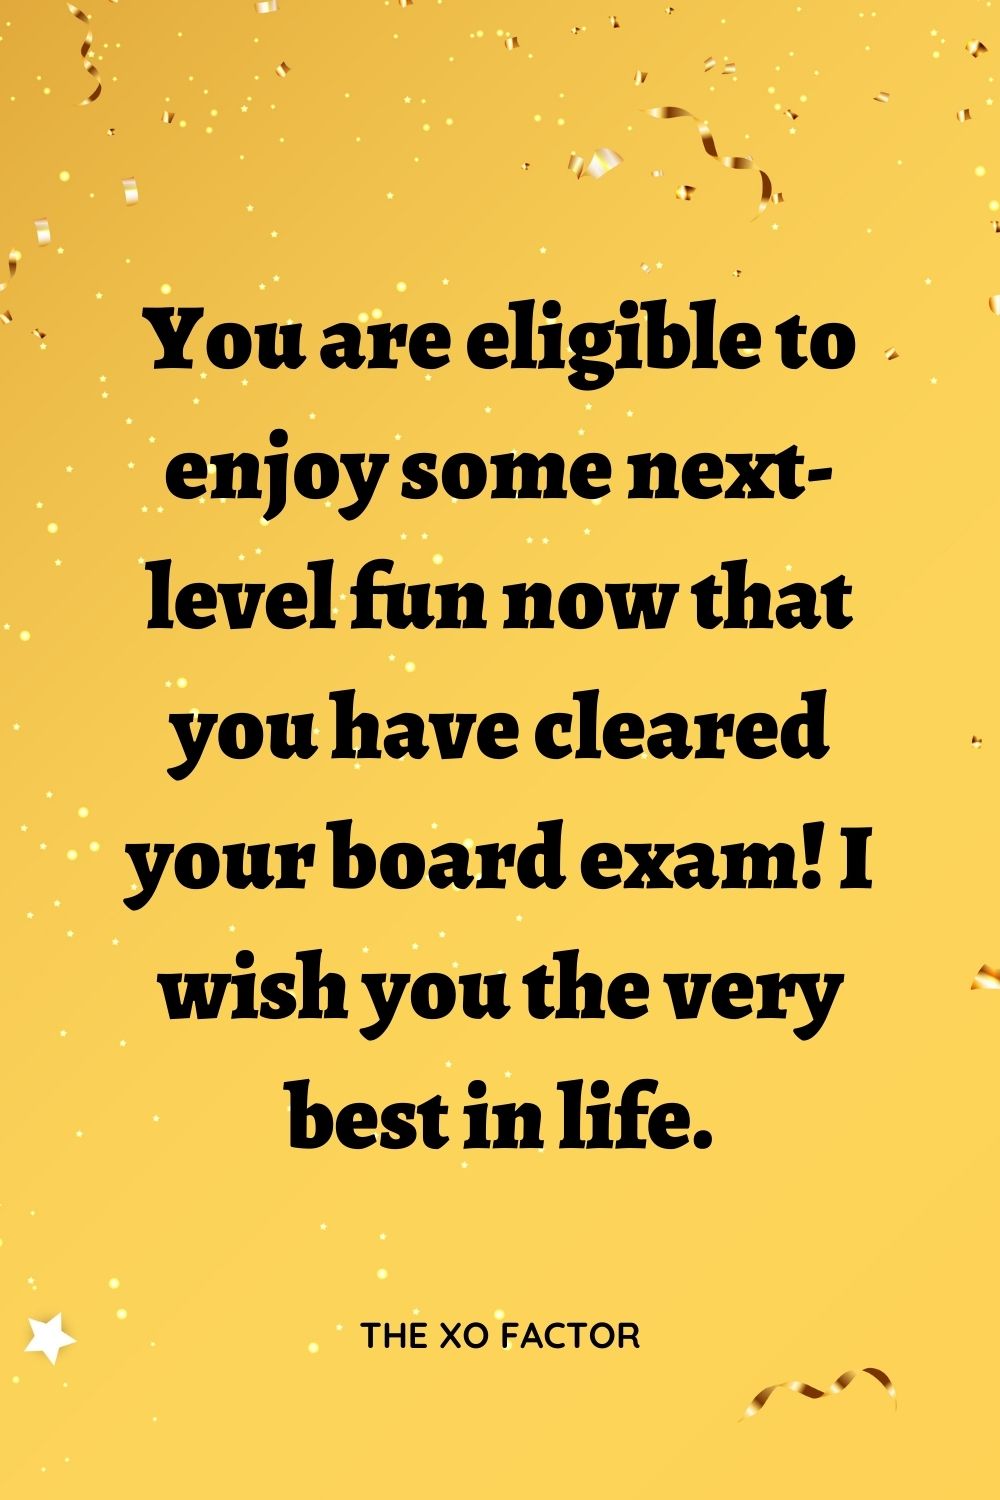 You are eligible to enjoy some next-level fun now that you have cleared your board exam! I wish you the very best in life.